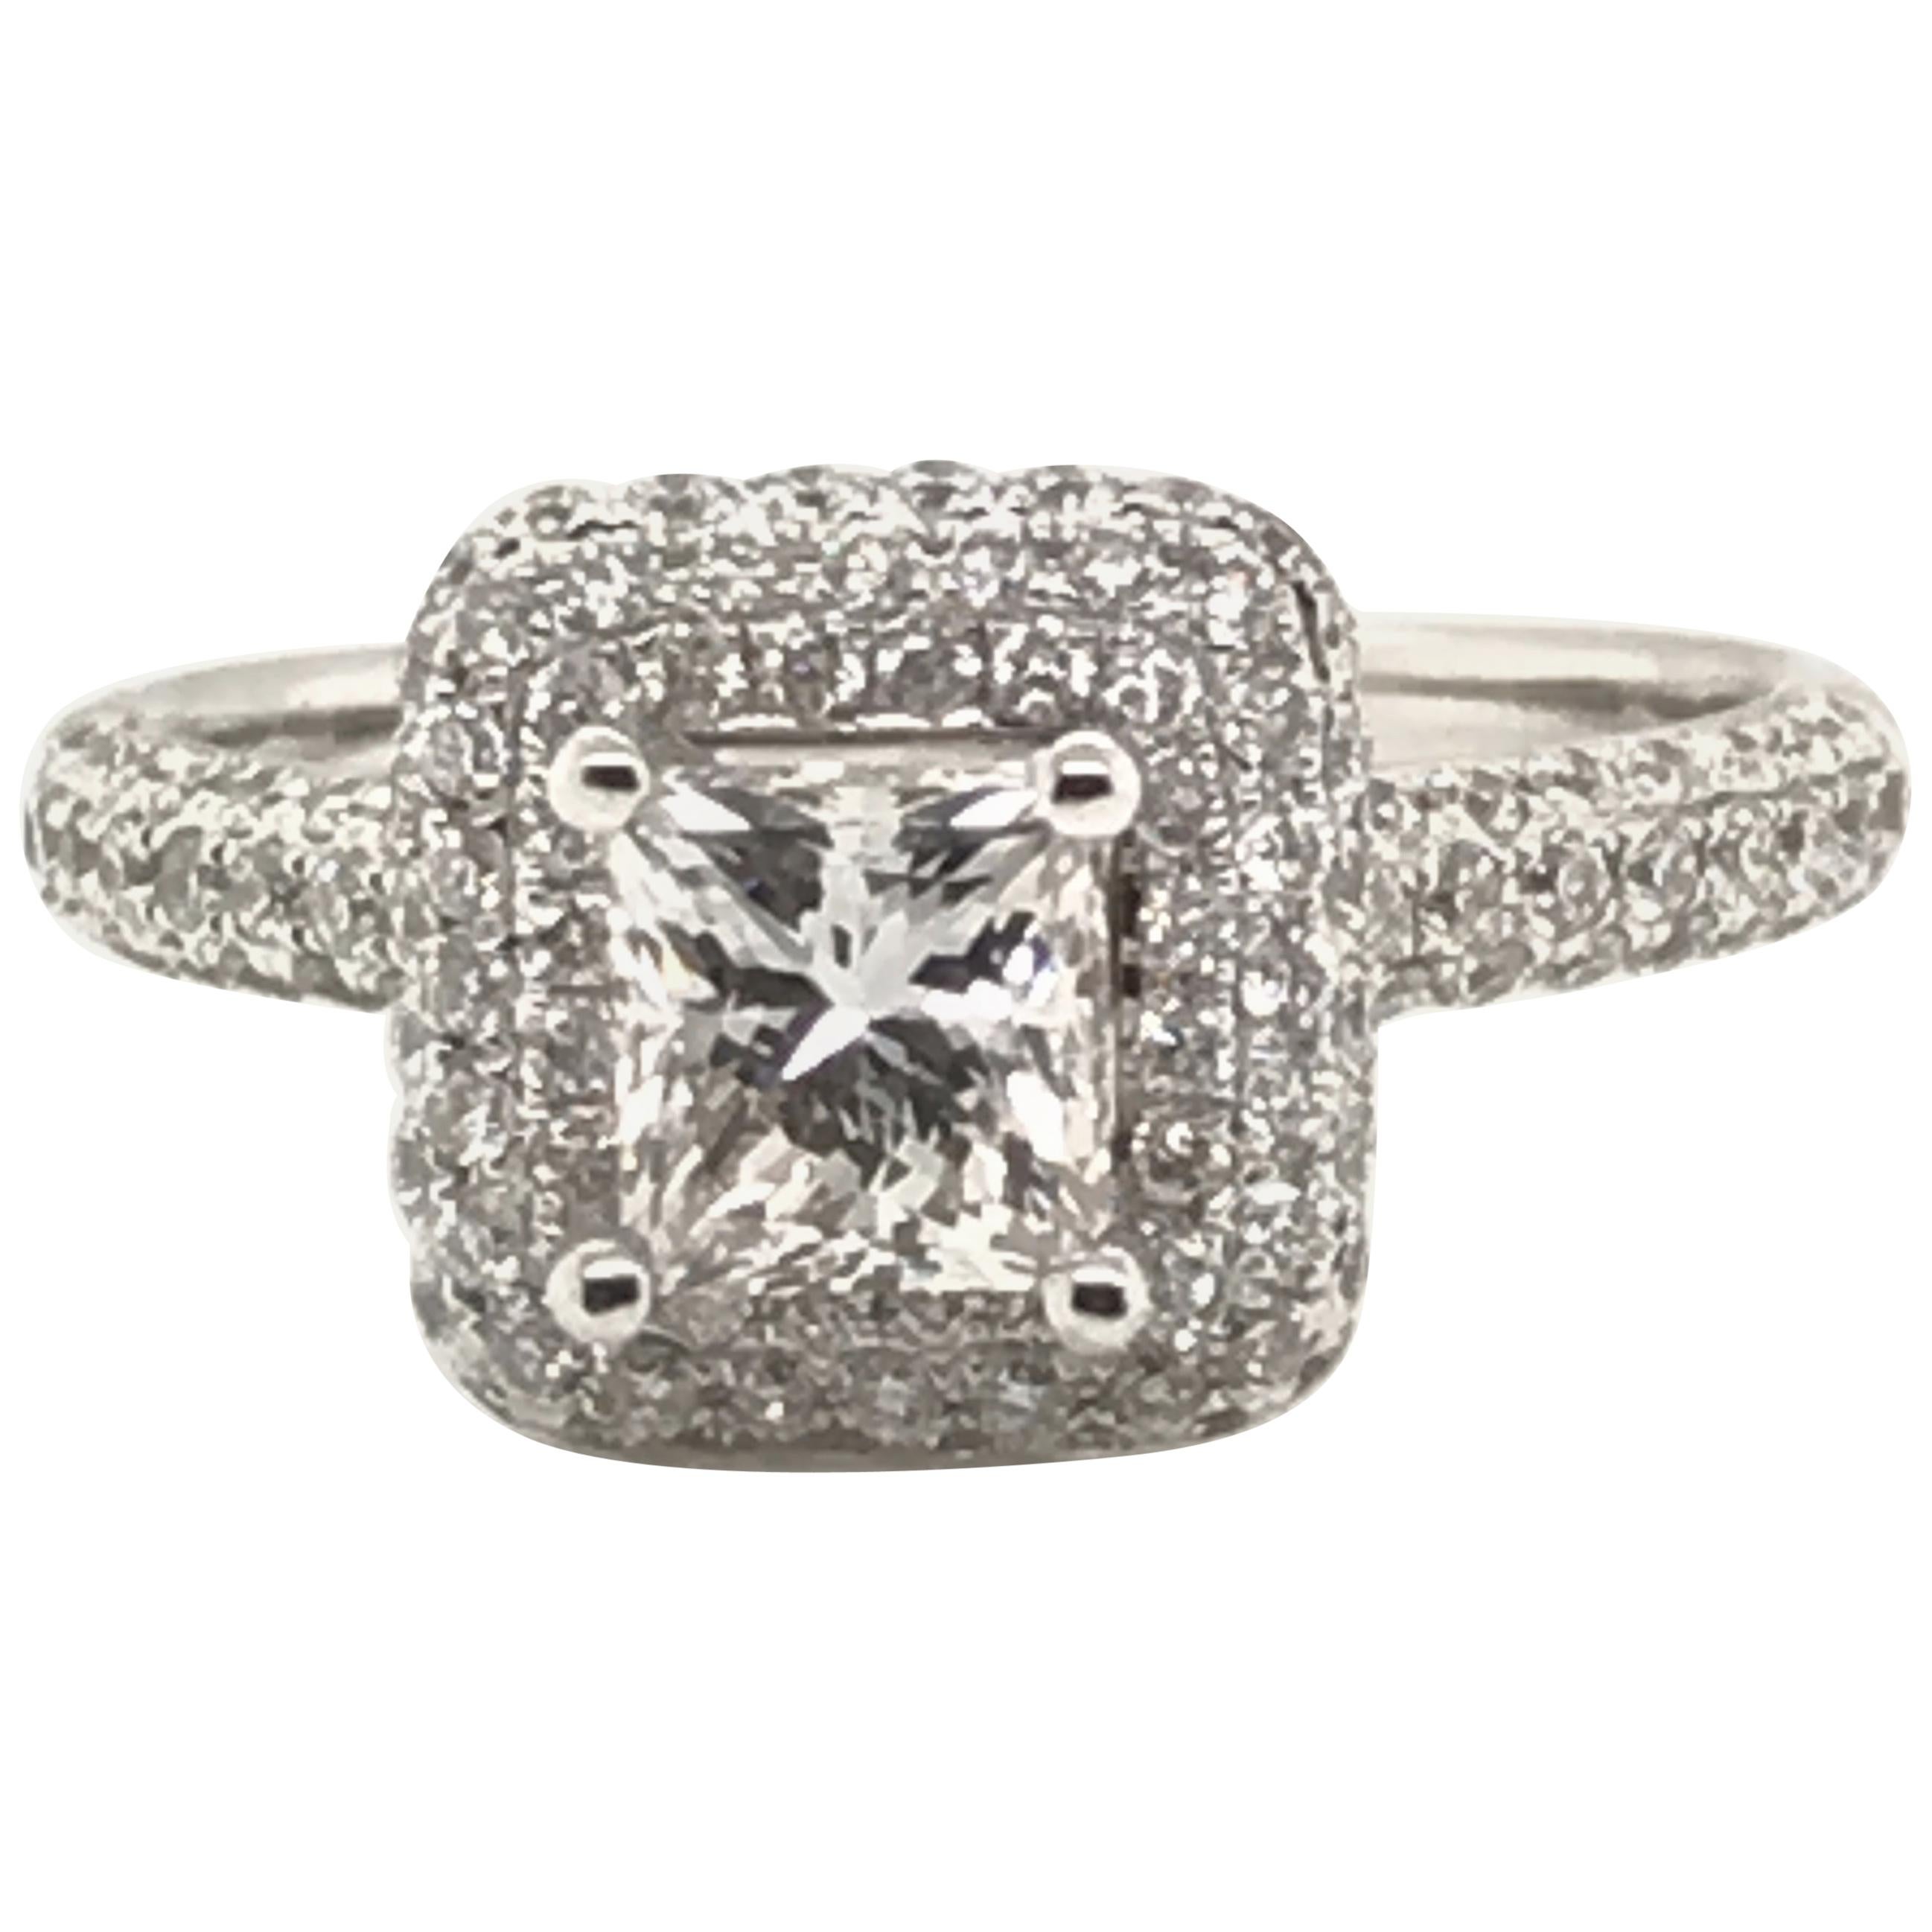  1.96 Carat Princess Cut Center with Rounds Diamond Ring For Sale